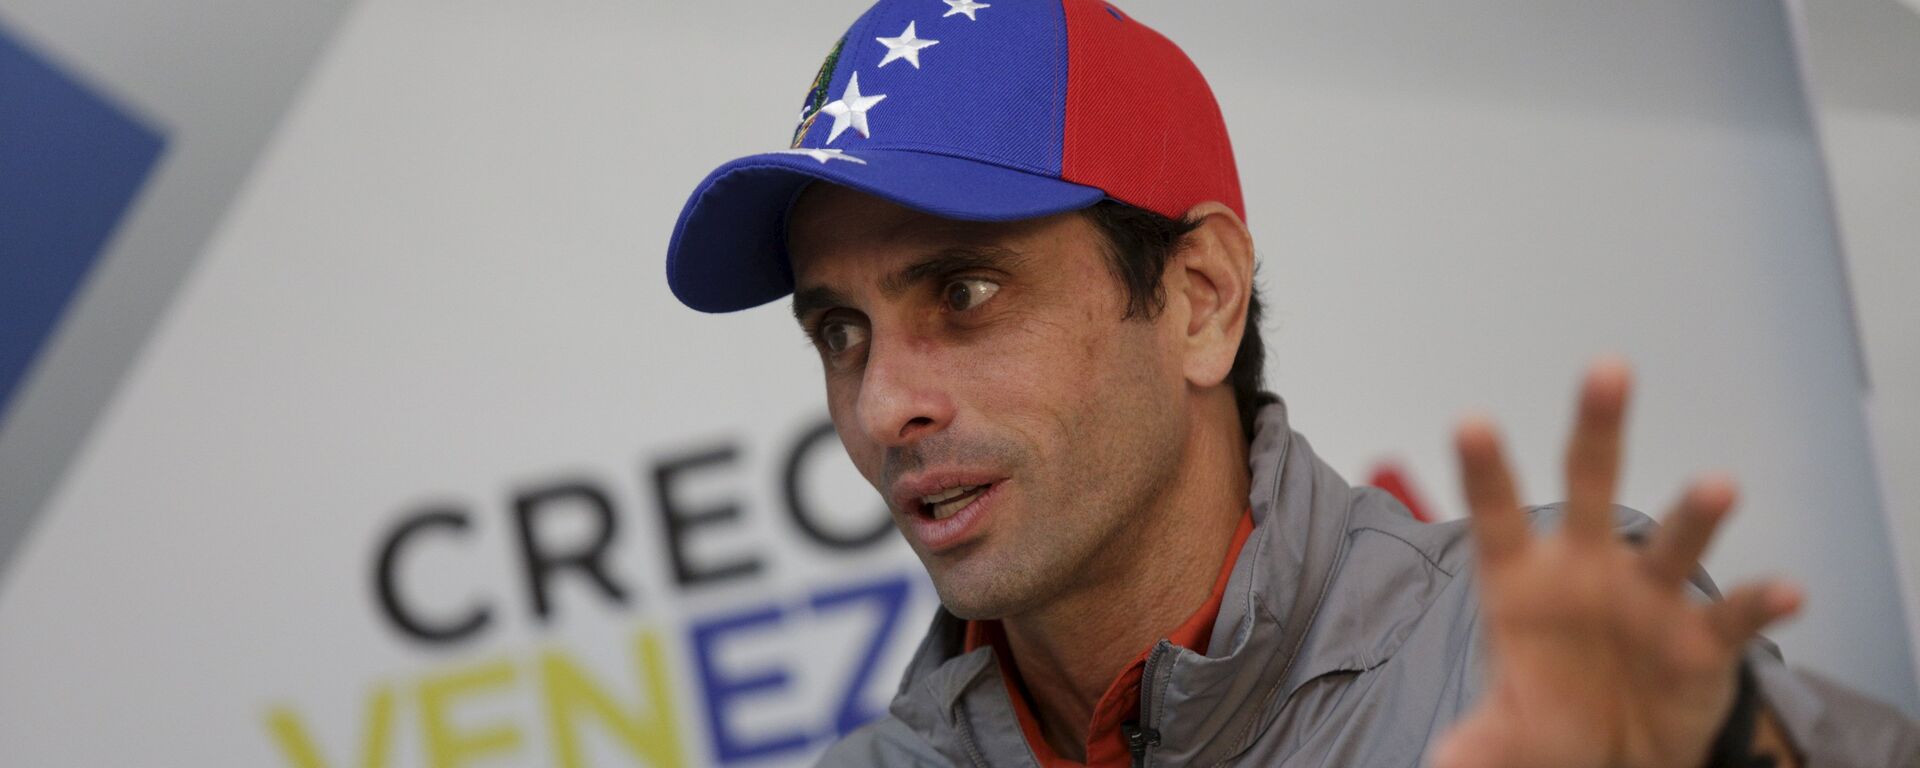 Venezuelan opposition leader and Governor of Miranda state Henrique Capriles speaks during an interview with Reuters in Caracas - Sputnik Mundo, 1920, 11.08.2021